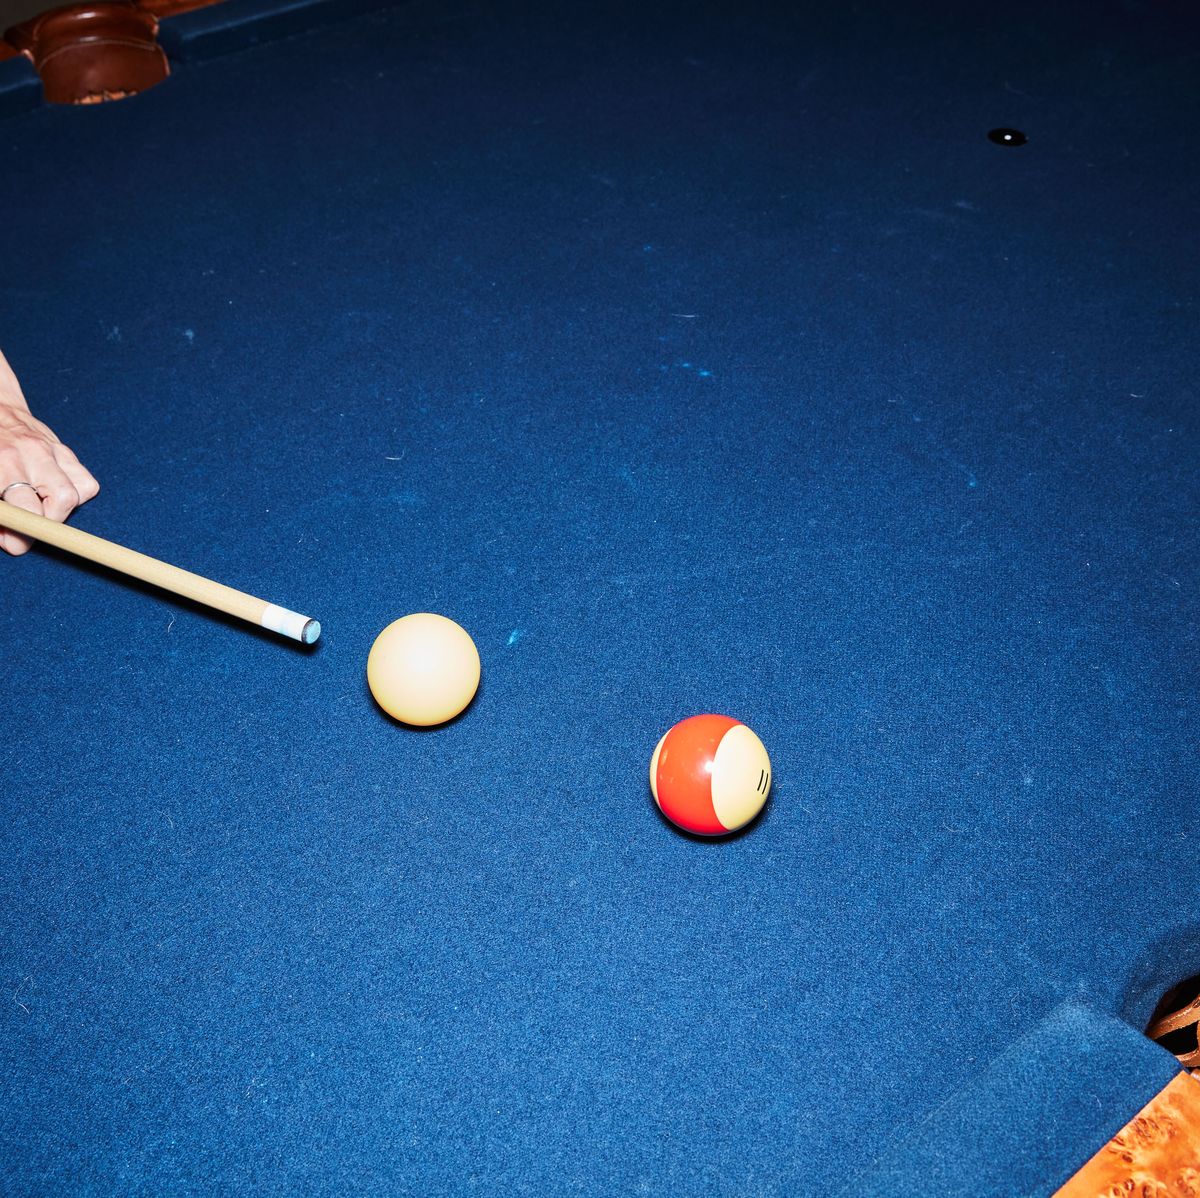 8 Ball Pool: Understanding the Different Types of Online Pool Players